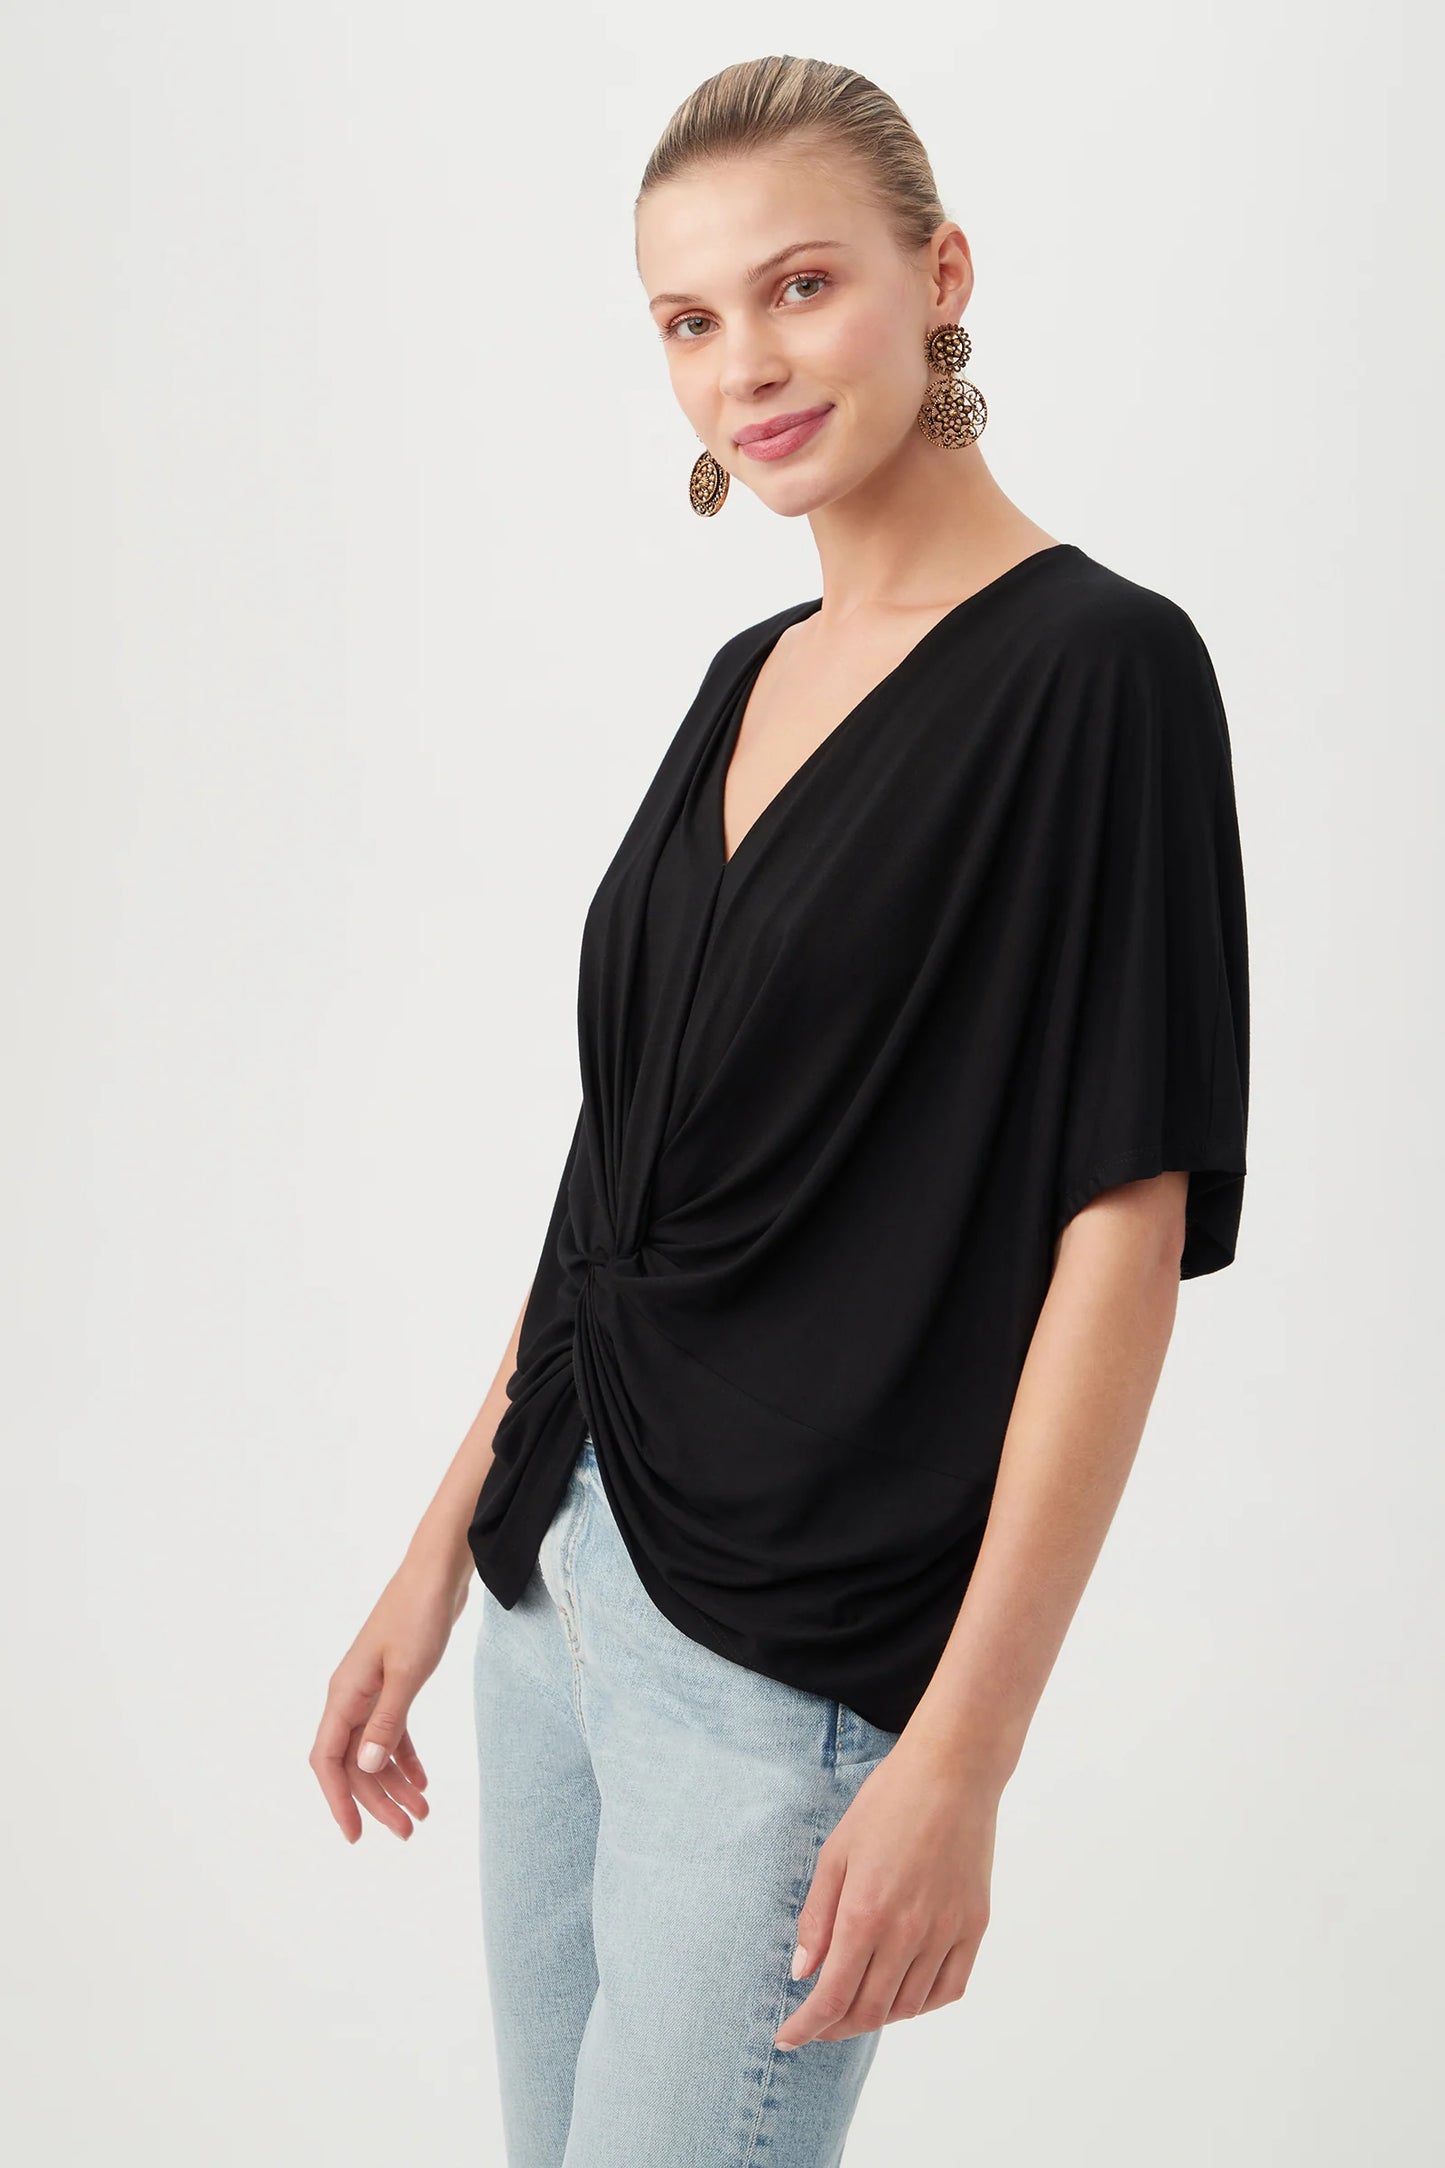 Empire State 2 Top by Trina Turk in Black